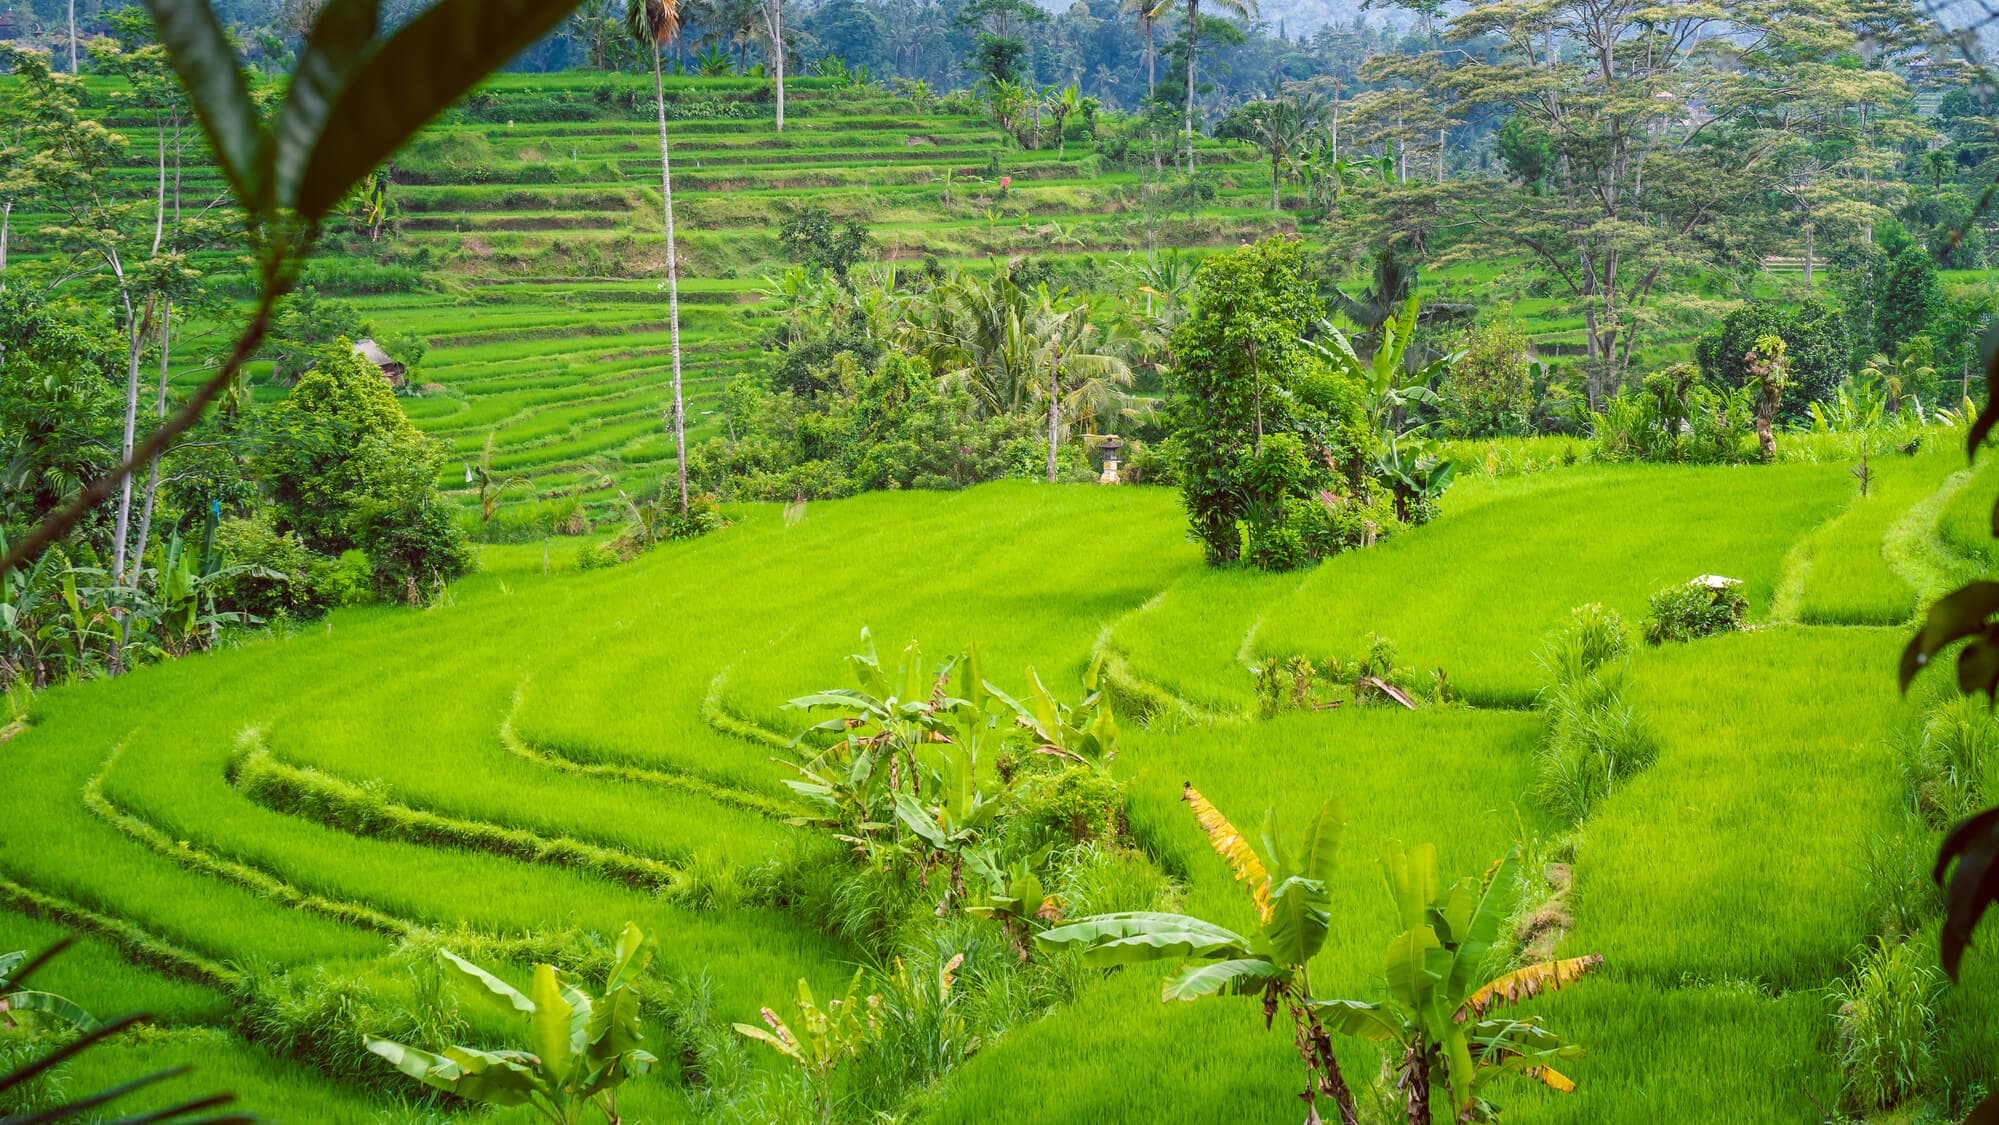 The beautiful valley of Sidemen - One of the places in East Bali you can't miss